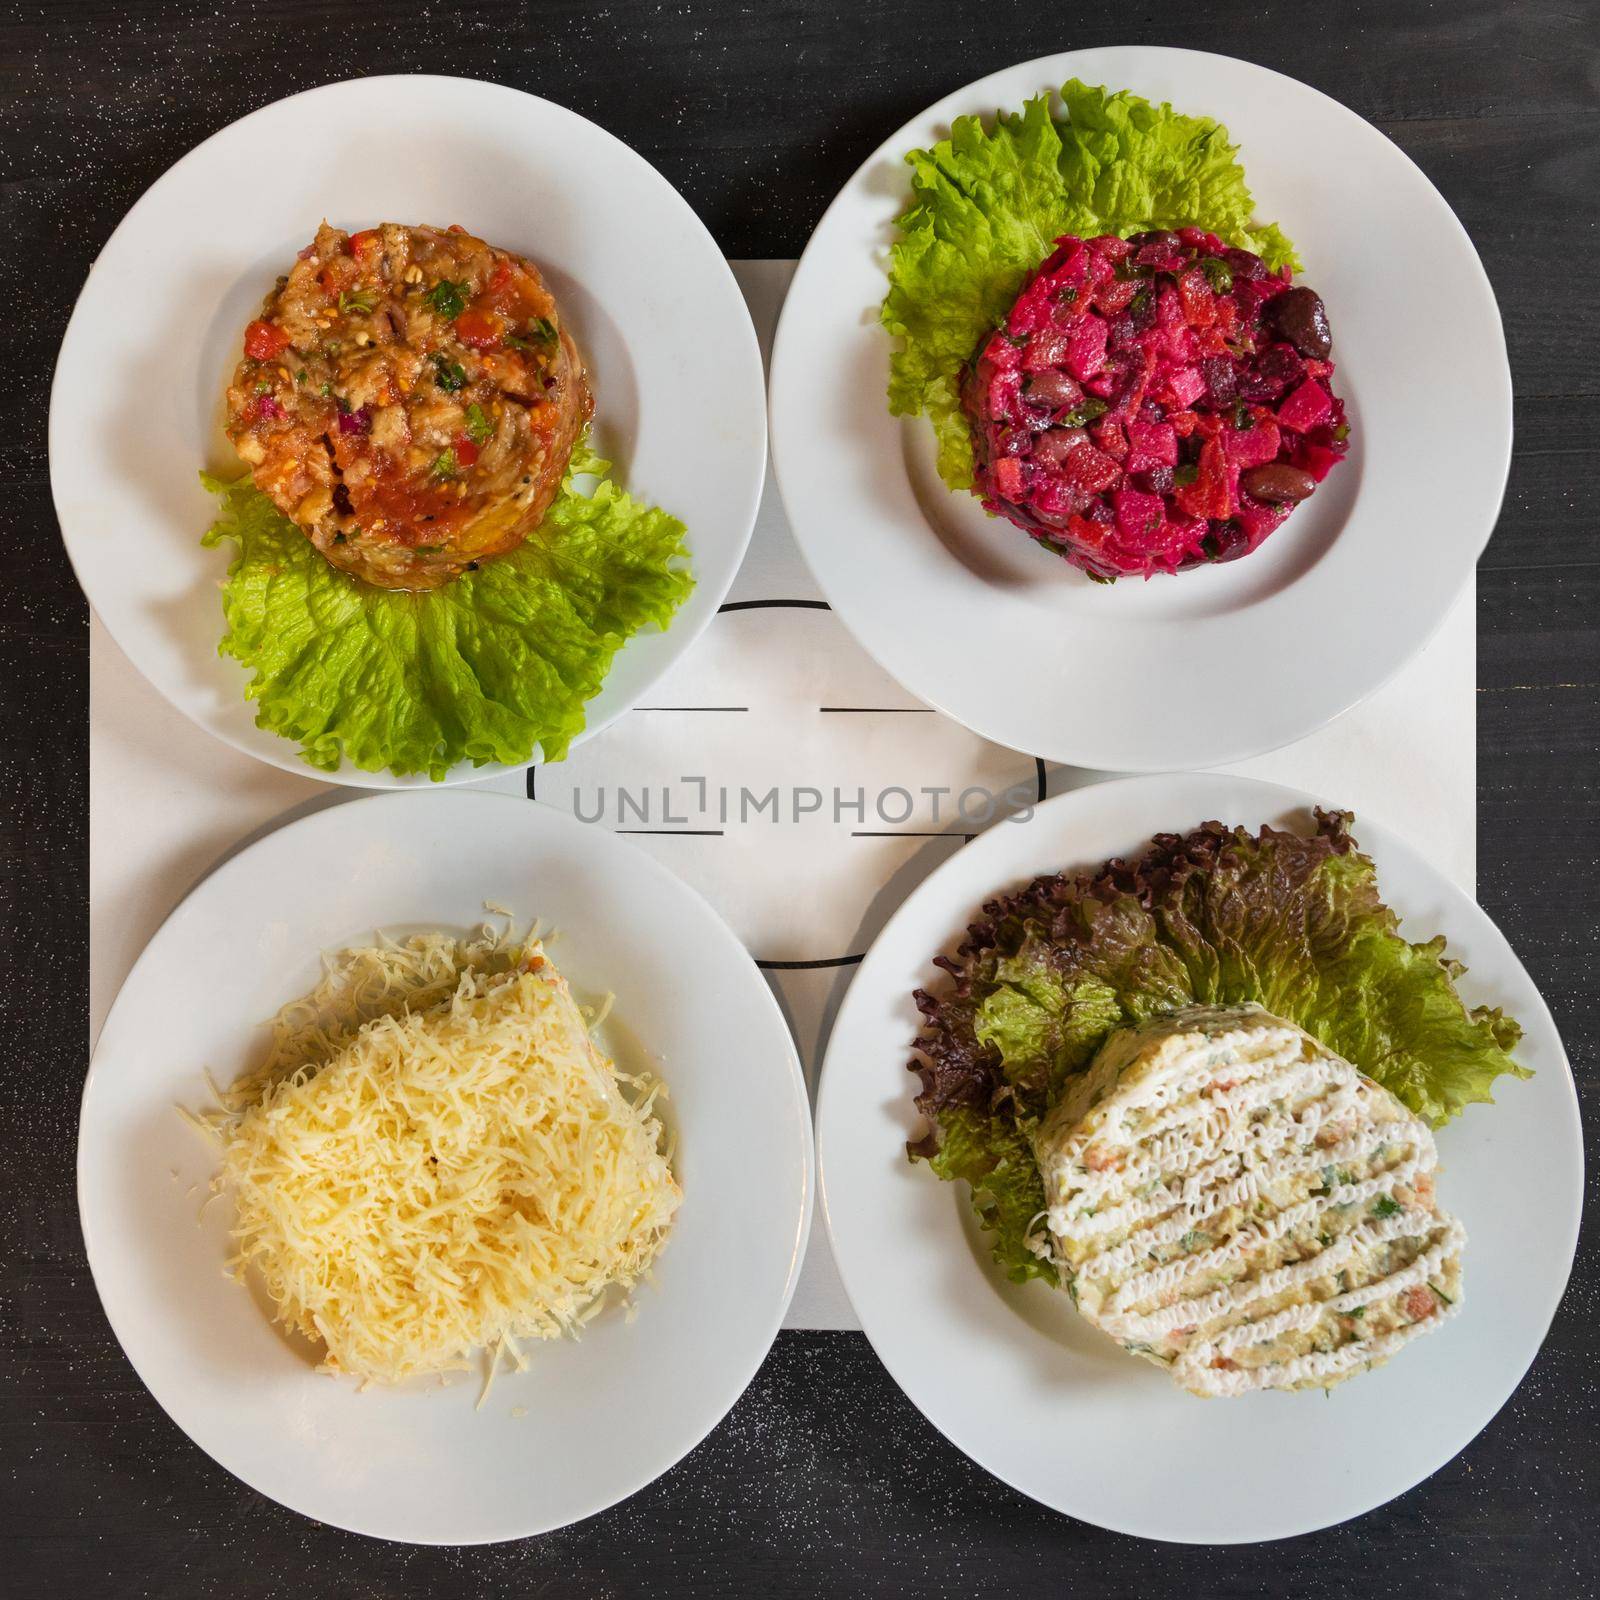 Tasty beetroot, eggplant, mimosa stolichny salad, top view by ferhad